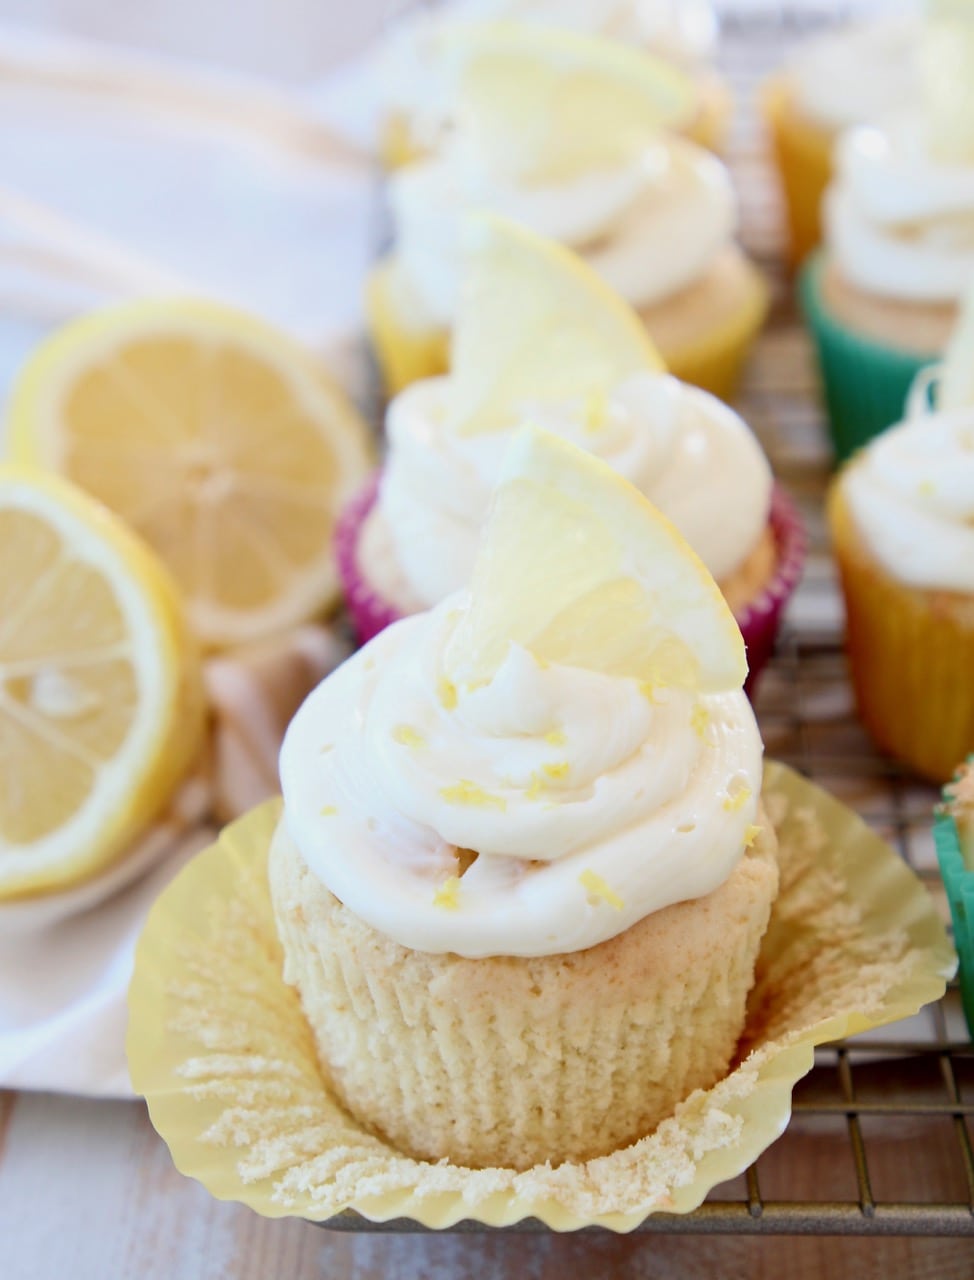 Lemon cupcake with wrapper unfolded, topped with lemon cream cheese frosting and lemon wedge